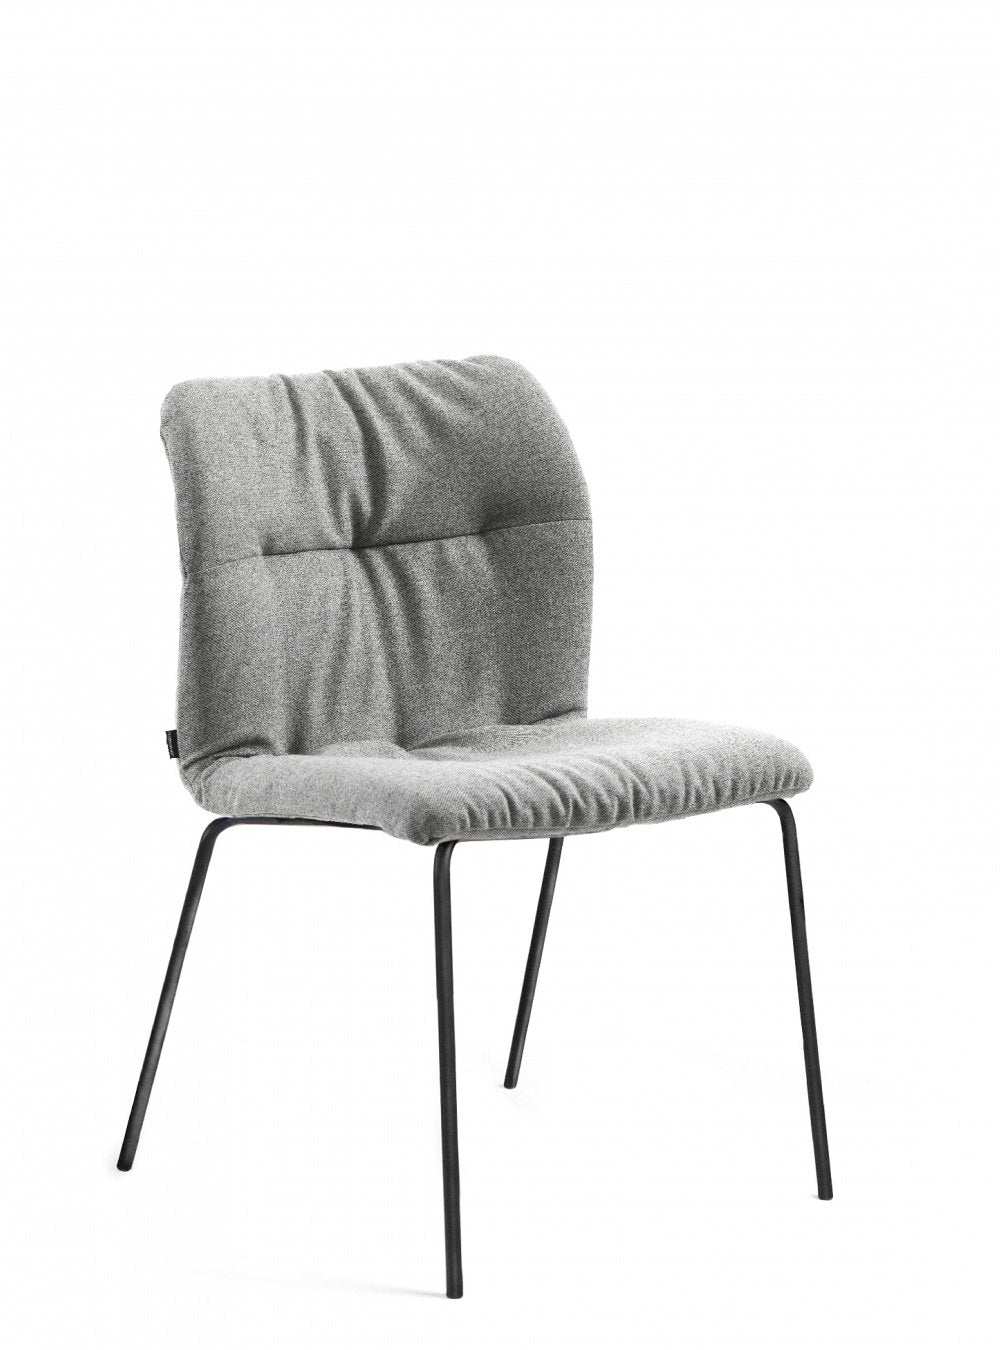 Haddoc Oyster 08 Side Chair-Johanson Design-Contract Furniture Store